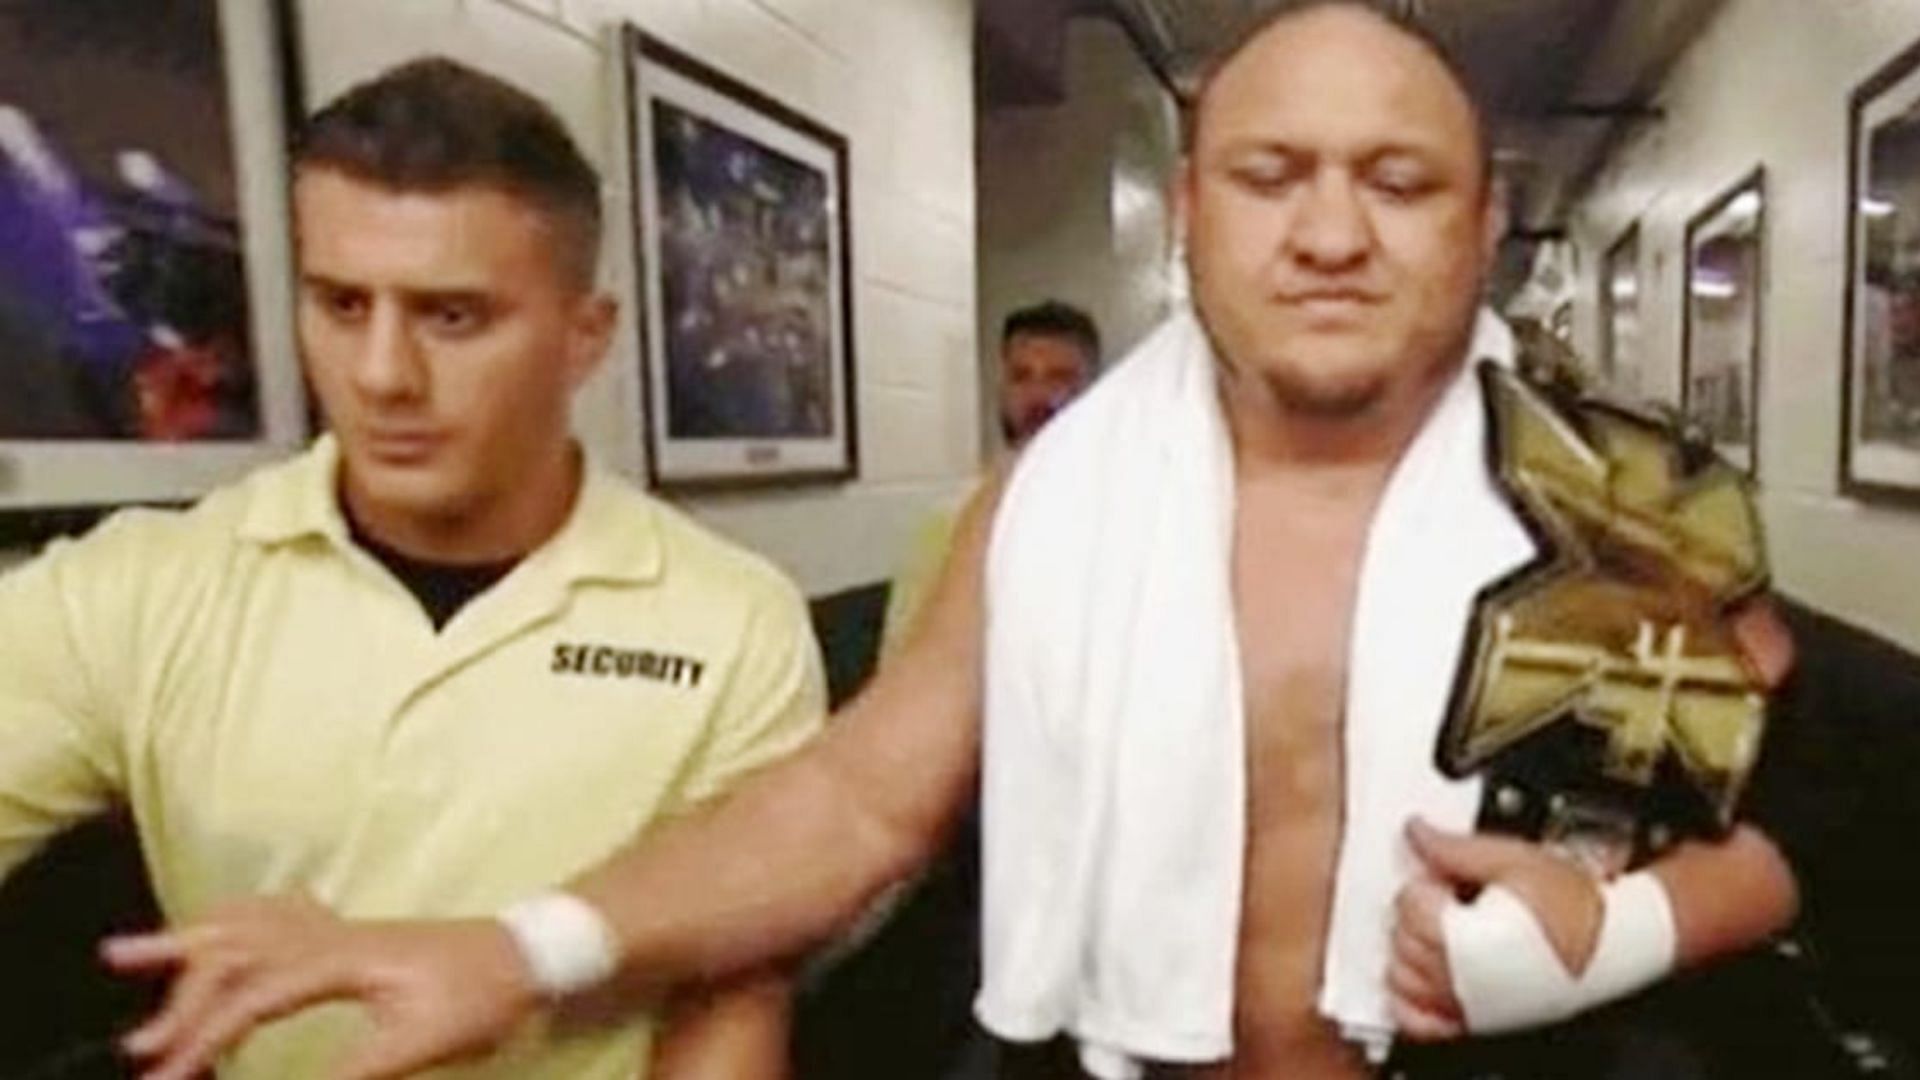 MJF and Samoa Joe are currently champions in AEW